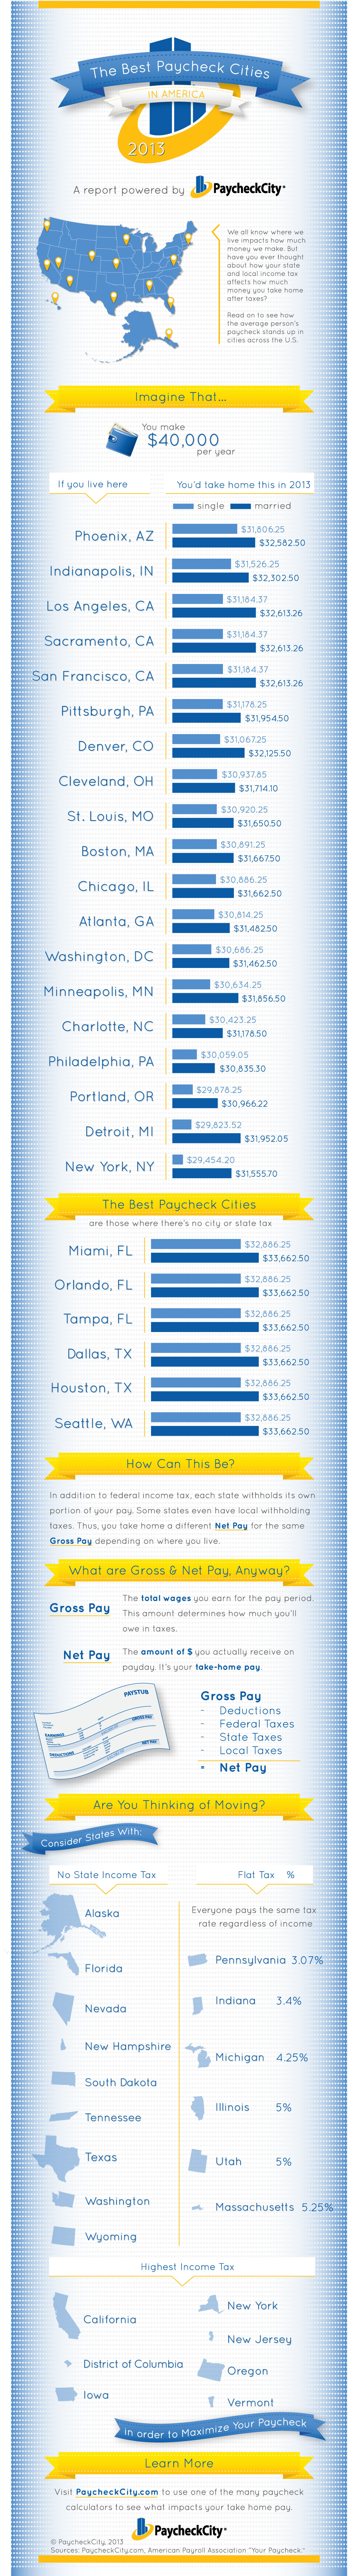 Infographic: The Best Paycheck Cities in America 2013